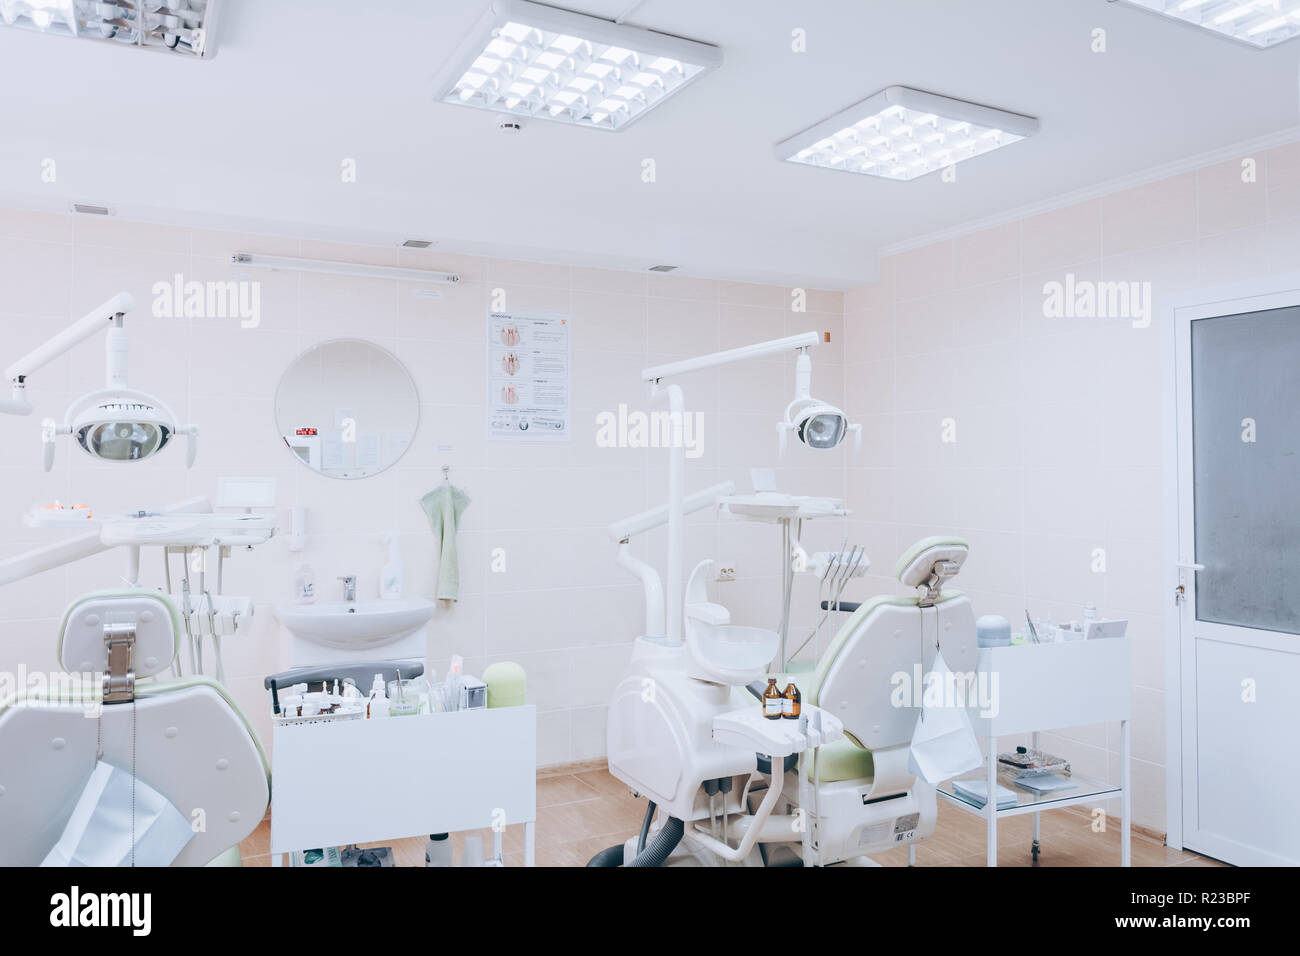 Stomatology Interior Of Dental Clinic With Professional